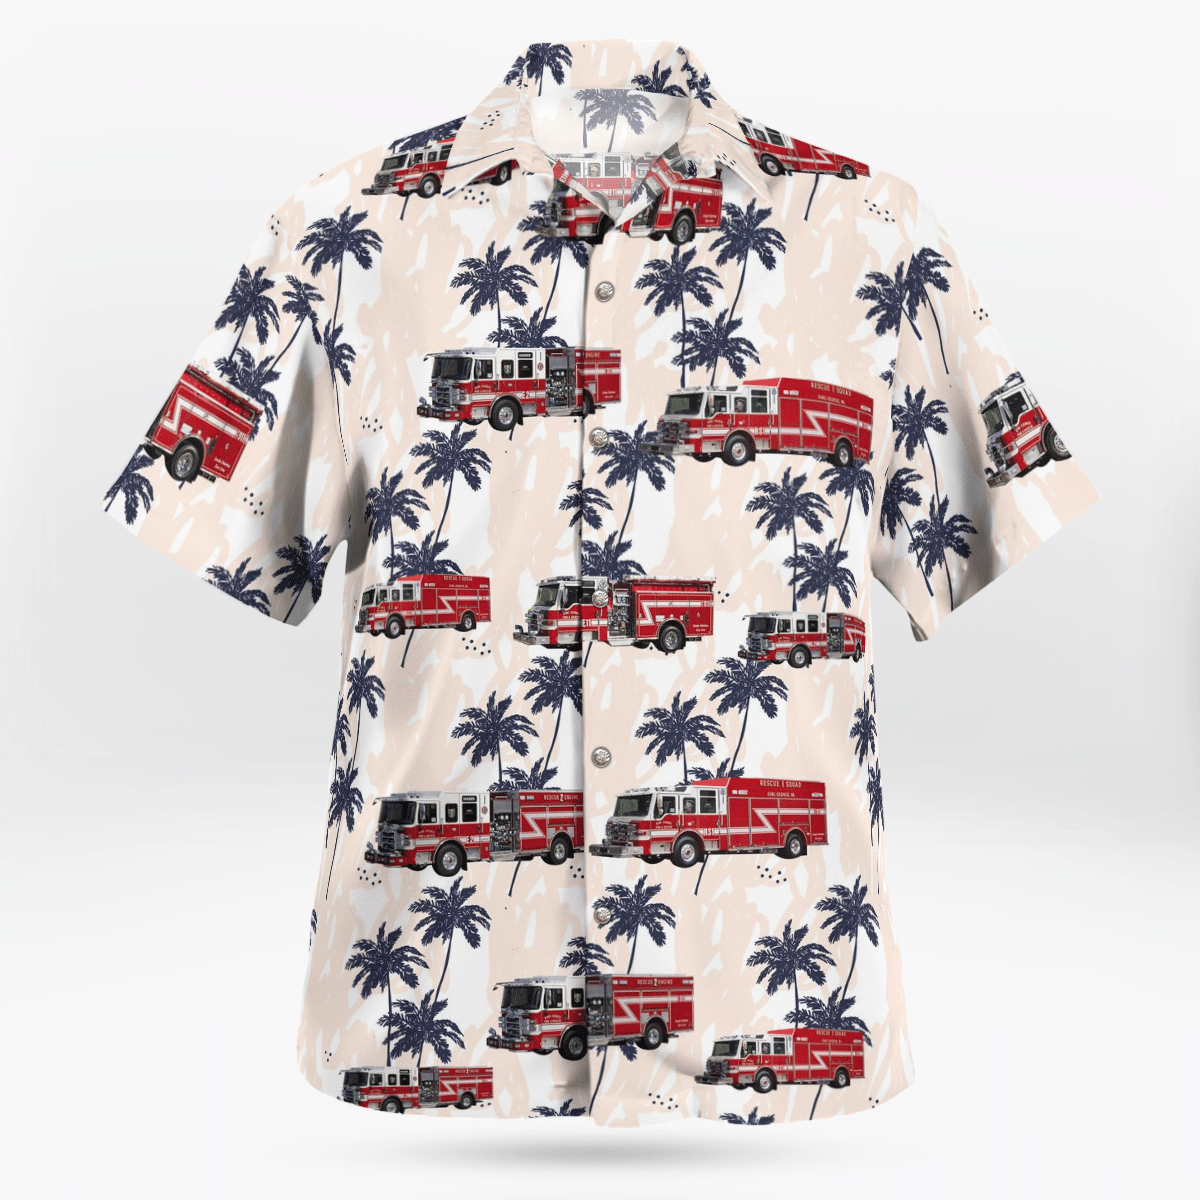 HOT King George County, Virginia, King George County Department of Fire, Rescue and Emergency Services Tropical Shirt1